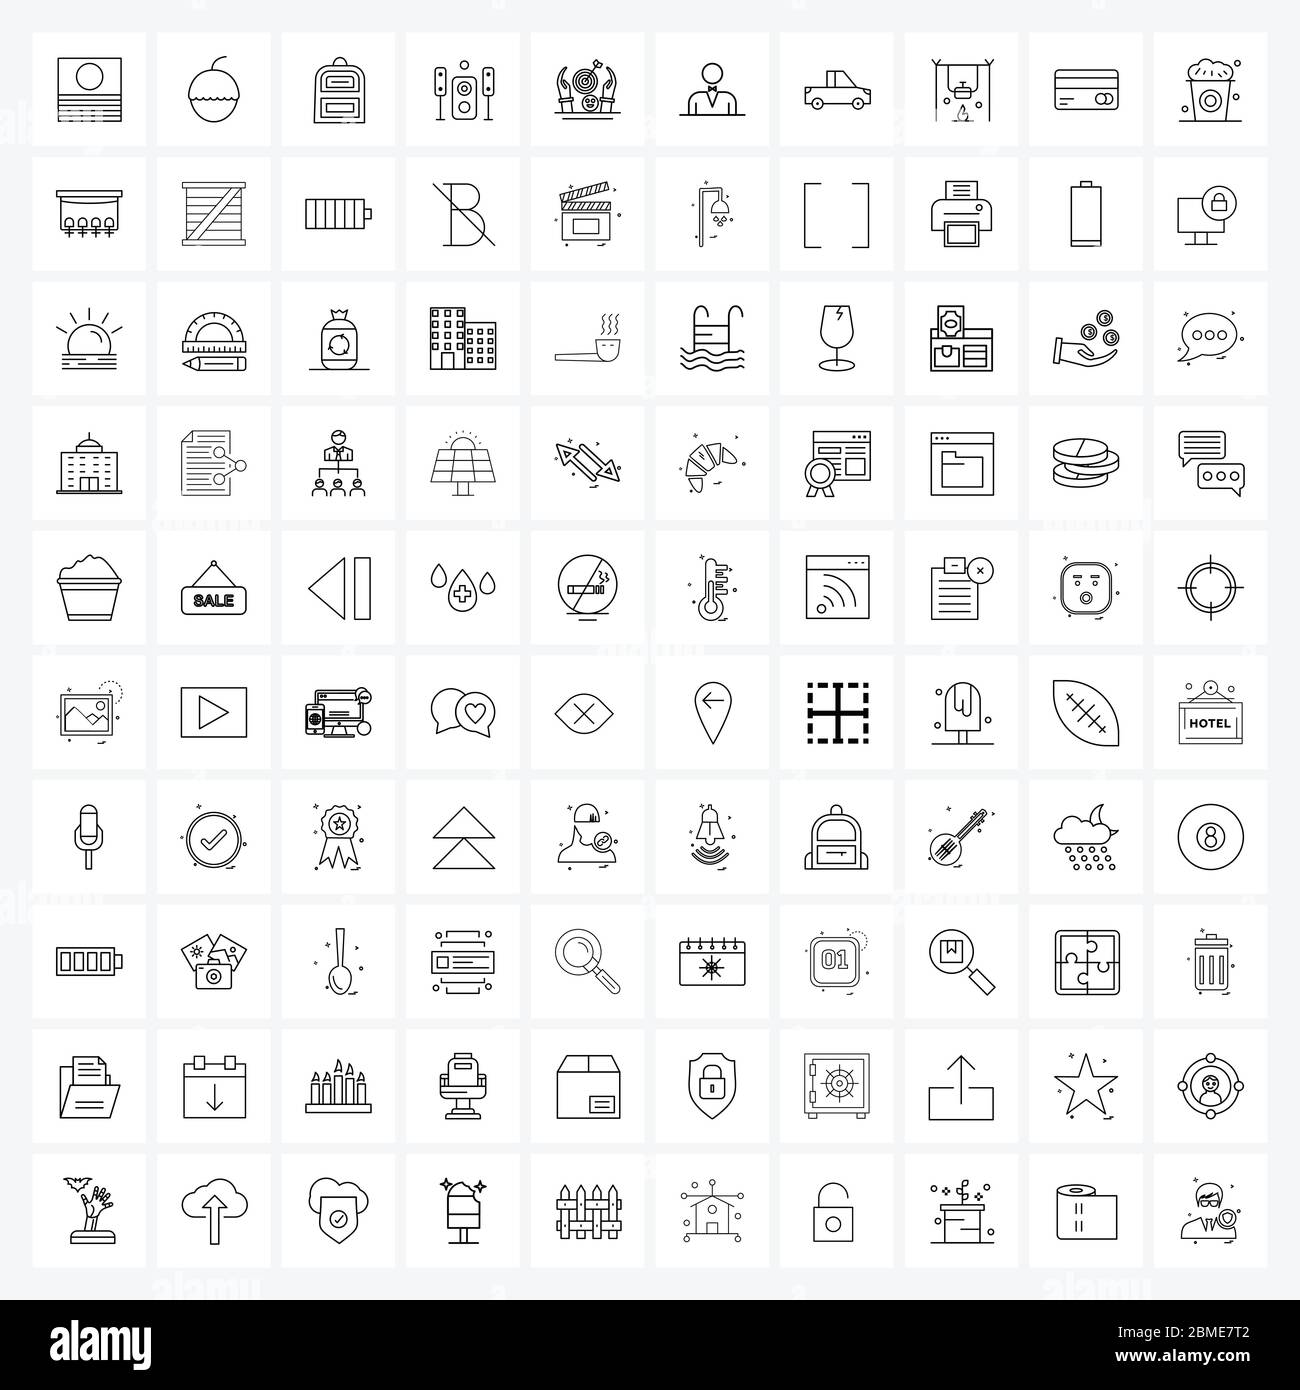 100 Universal Line Icon Pixel Perfect Symbols of focus, dart, bag, sound system, music player Vector Illustration Stock Vector